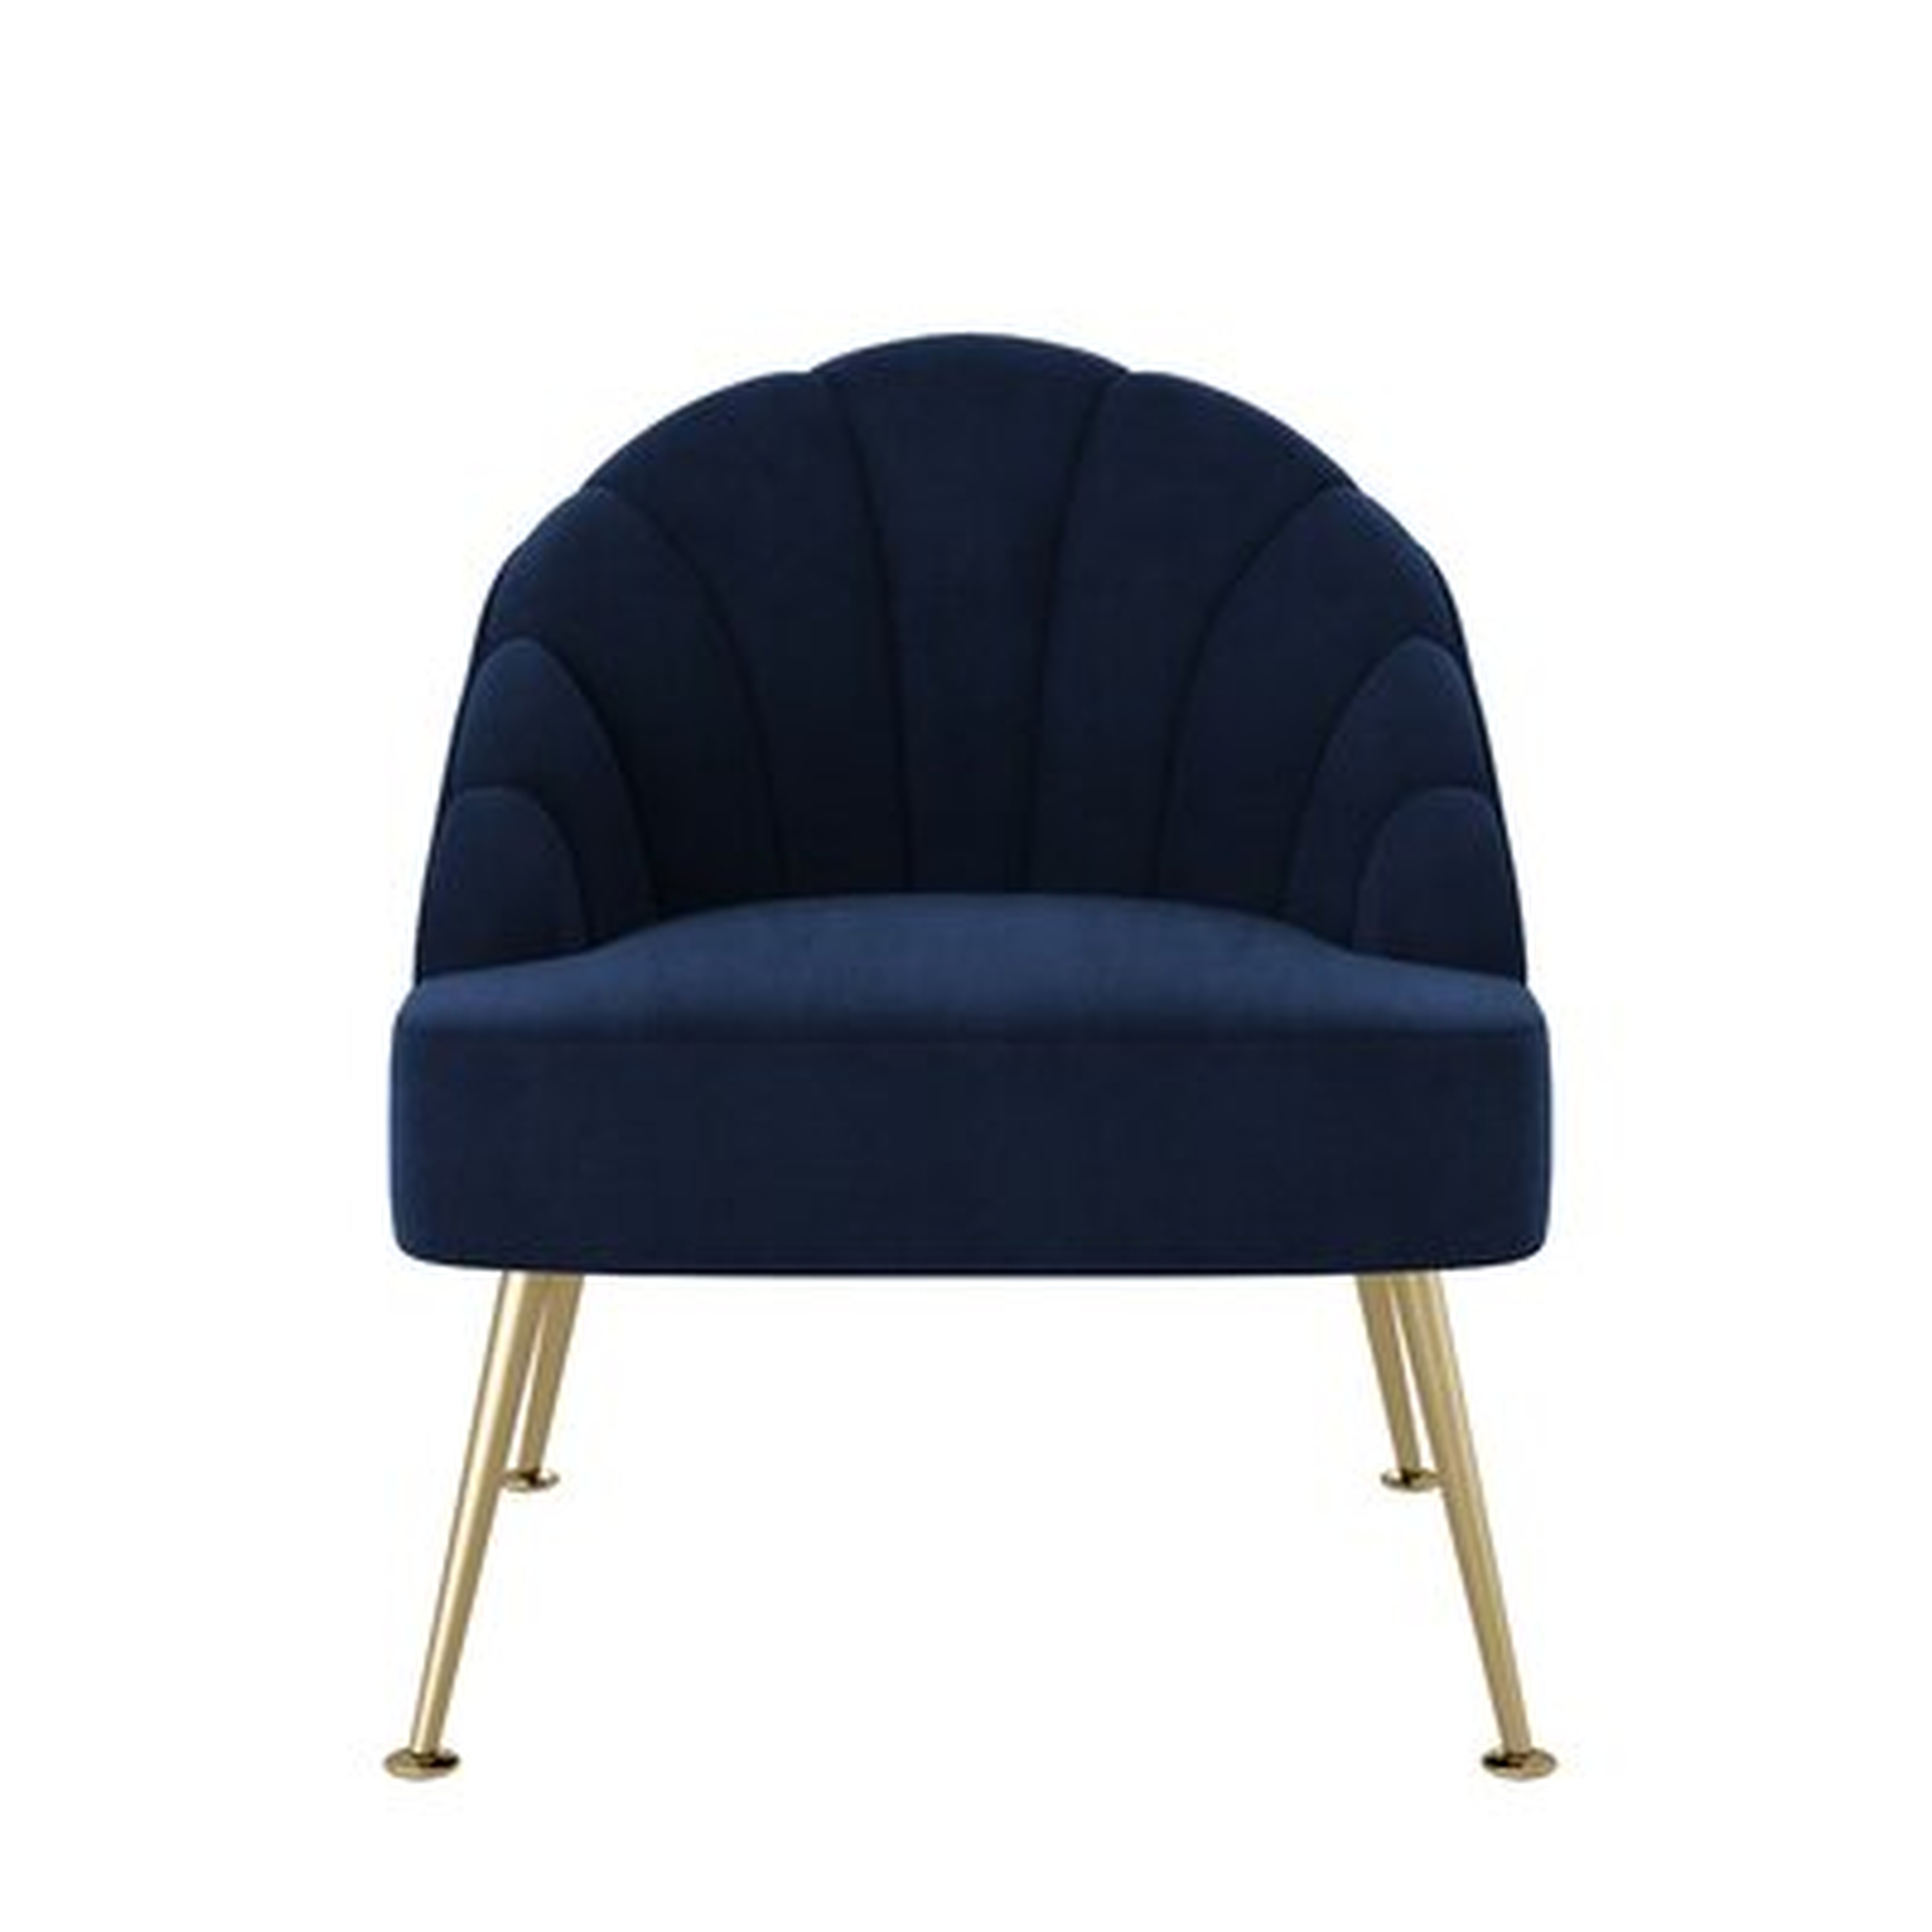 Claire Channel Shell Barrel Chair - Wayfair